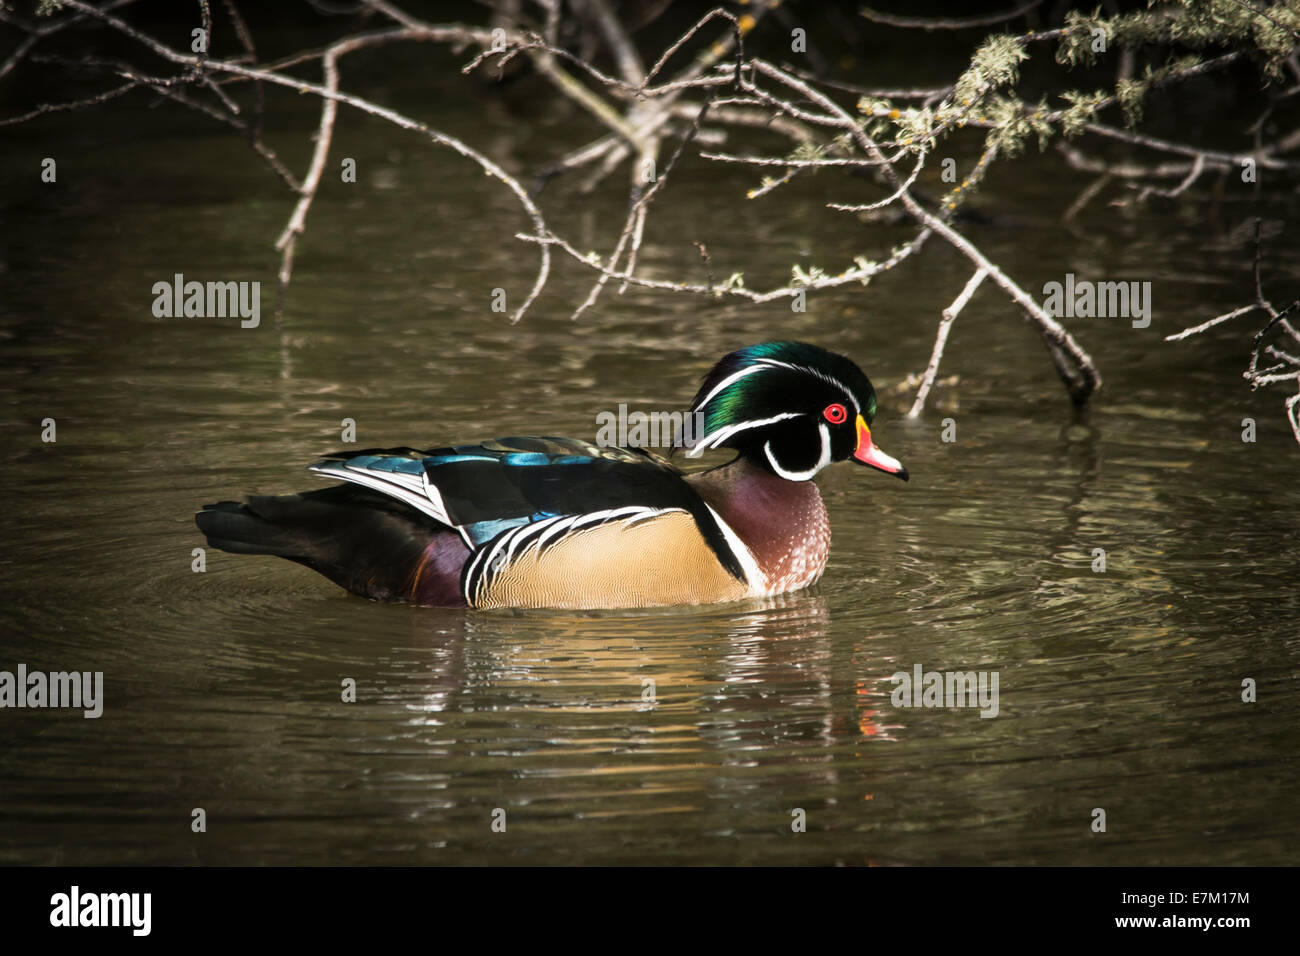 The wood duck is a medium-sized perching duck. Their breeding habitat is wooded swamps, shallow lakes, and marshes or ponds. Stock Photo